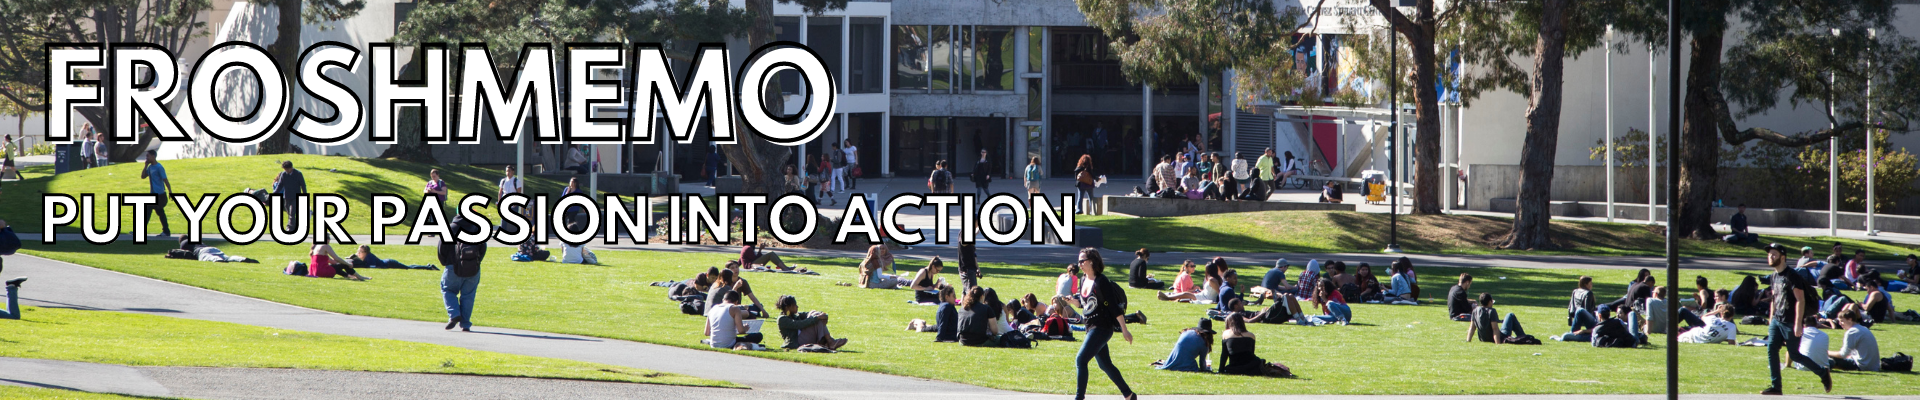 The SFSU quad with the text "FroshMemo Put Your Passion Into Action" overlaid